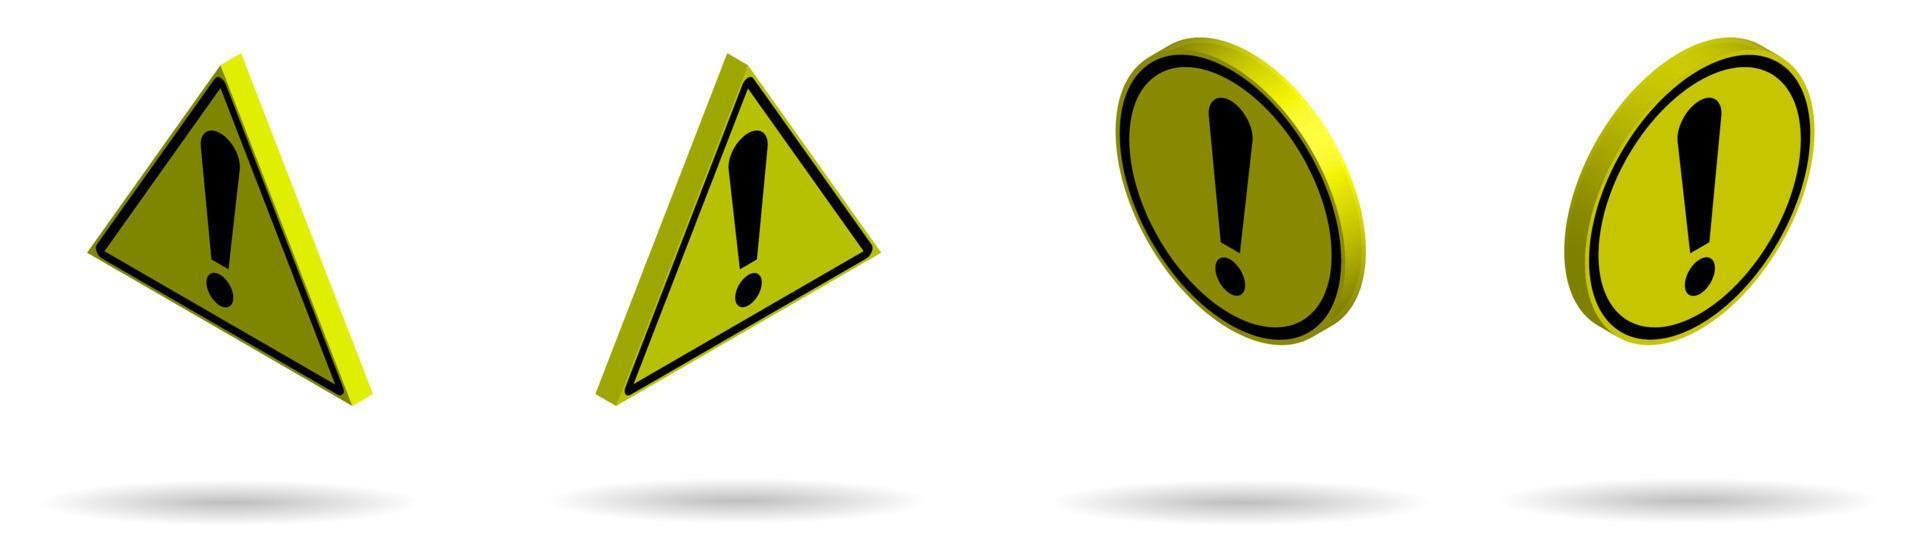 Set of isometric danger signs, exclamation mark on a yellow background. Attention. Isolated vector